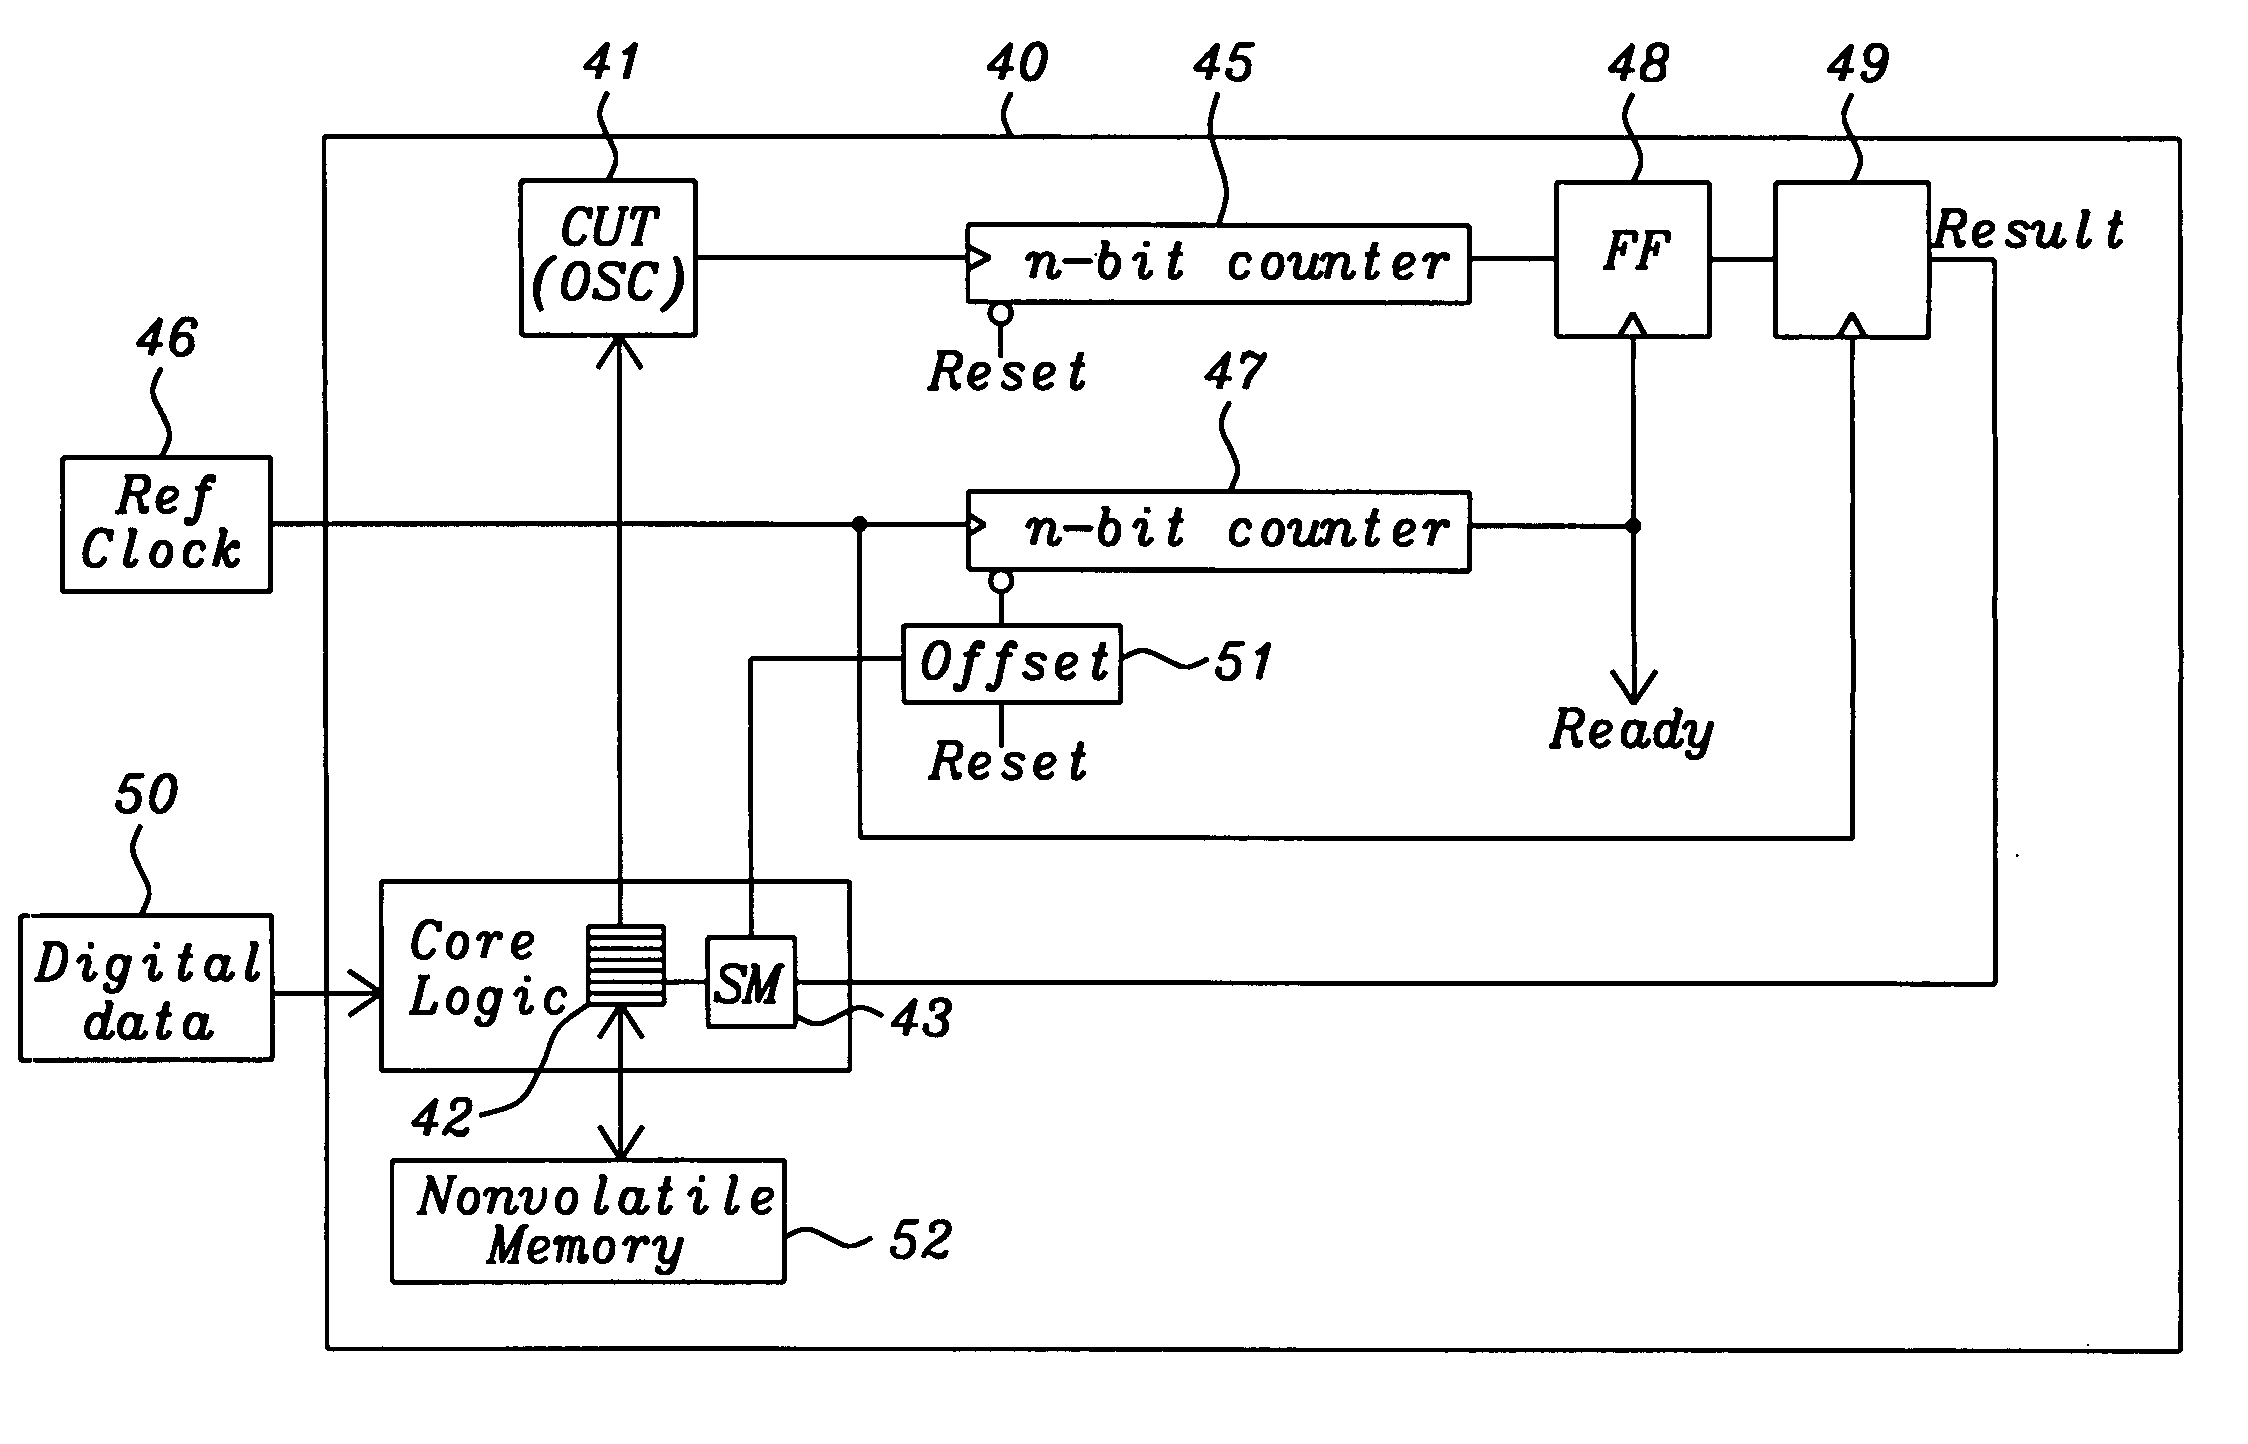 Self-trim and self-test of on-chip values